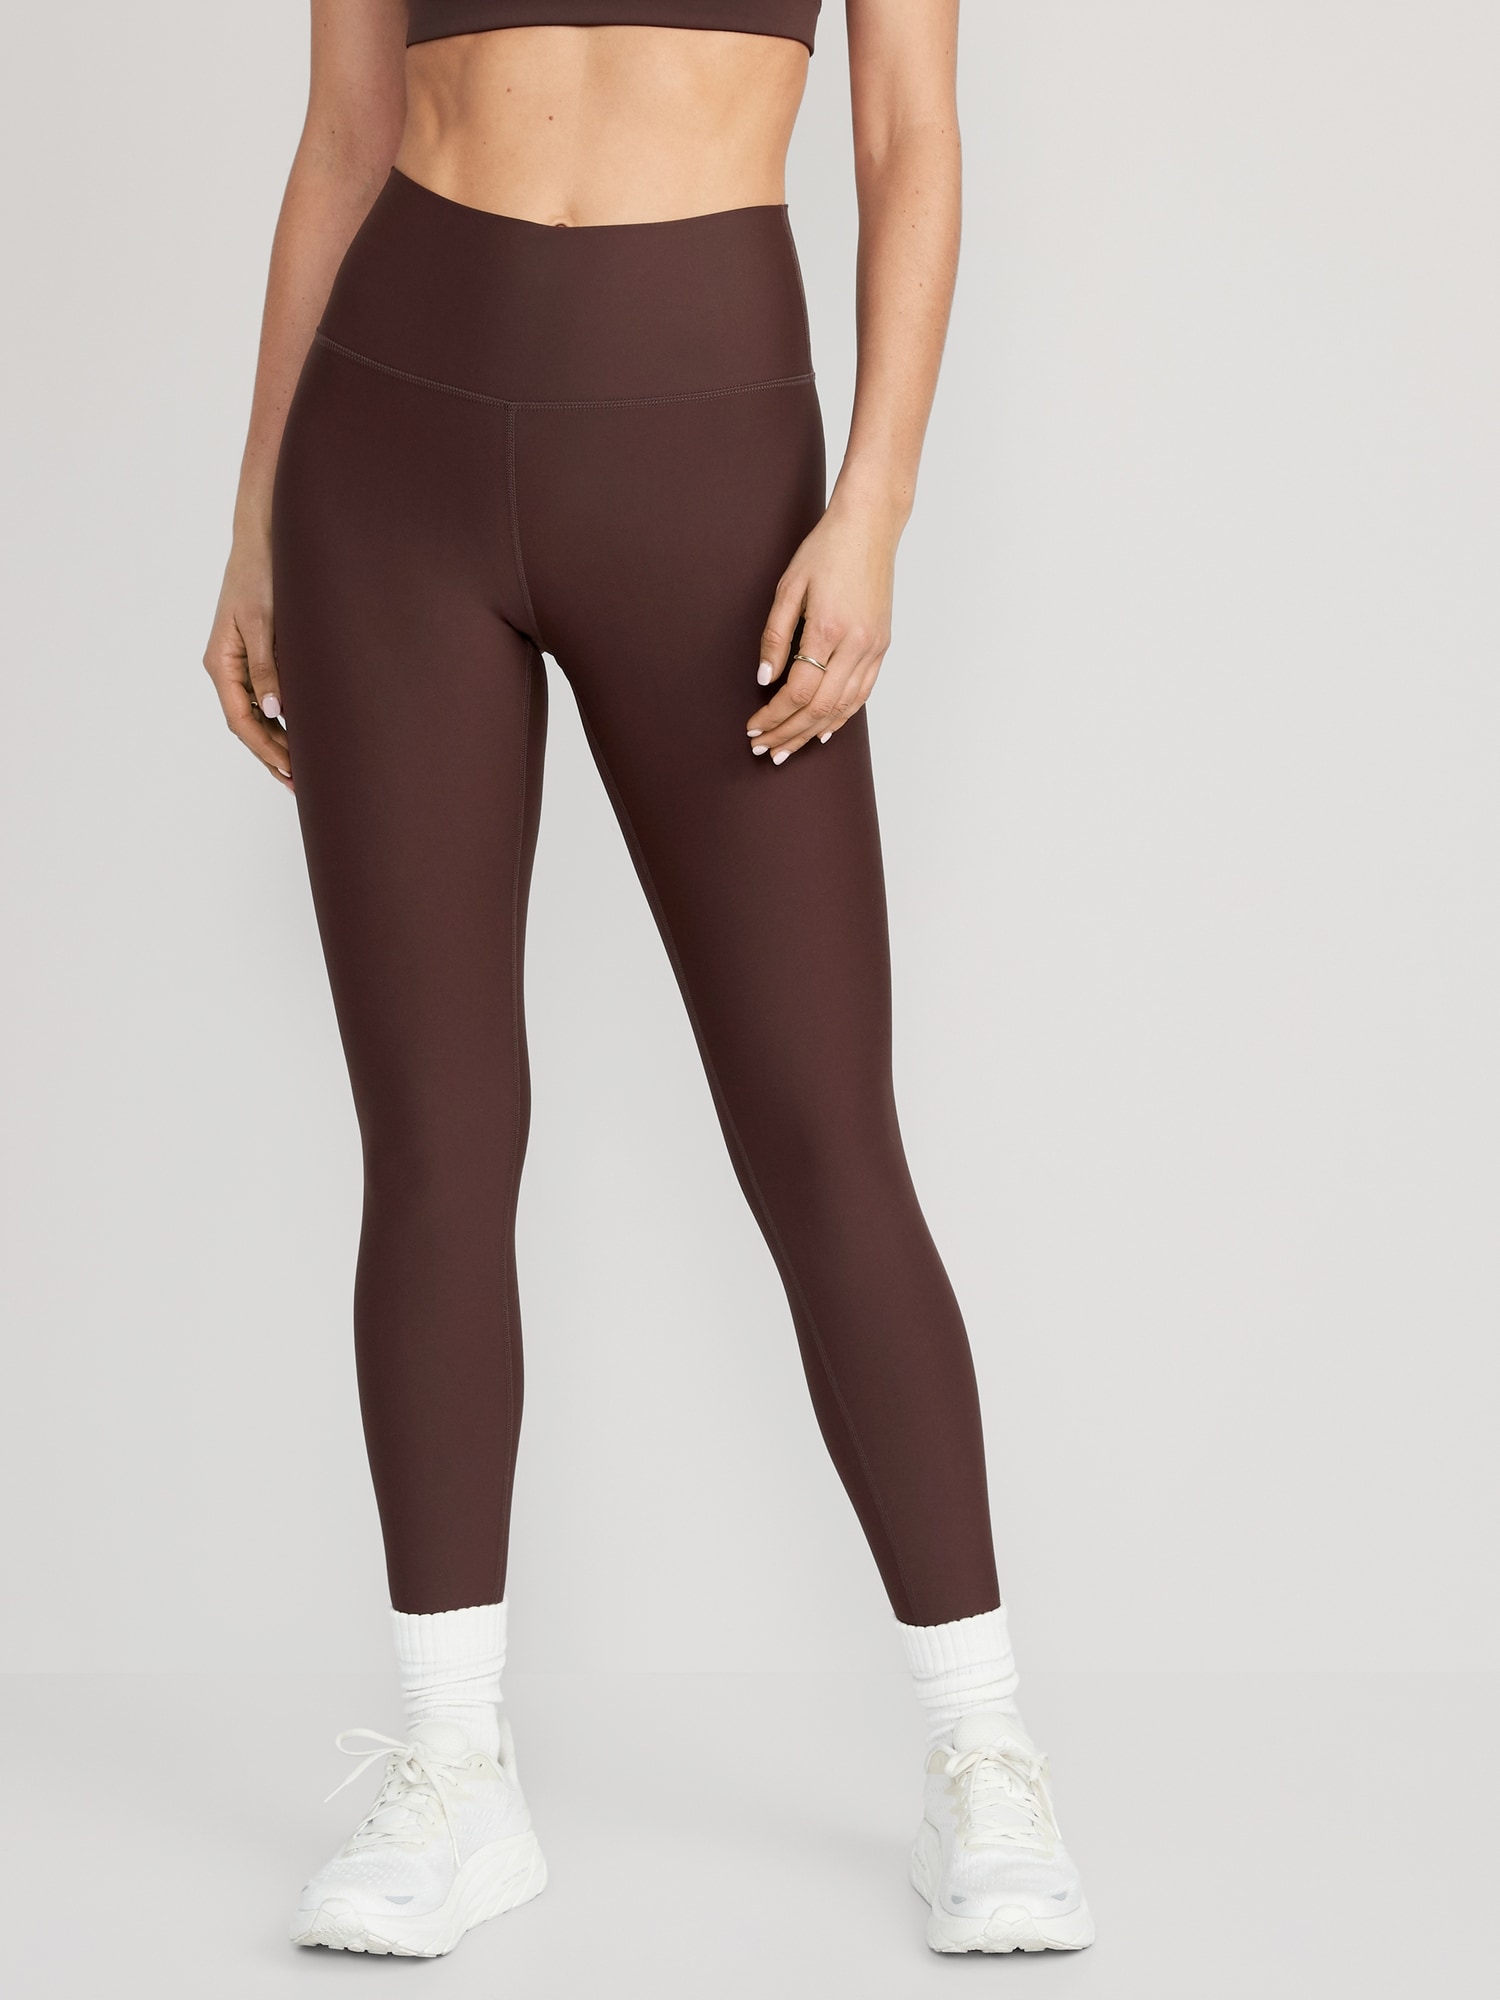 Old Navy - High-Waisted PowerSoft 7/8 Leggings for Women brown